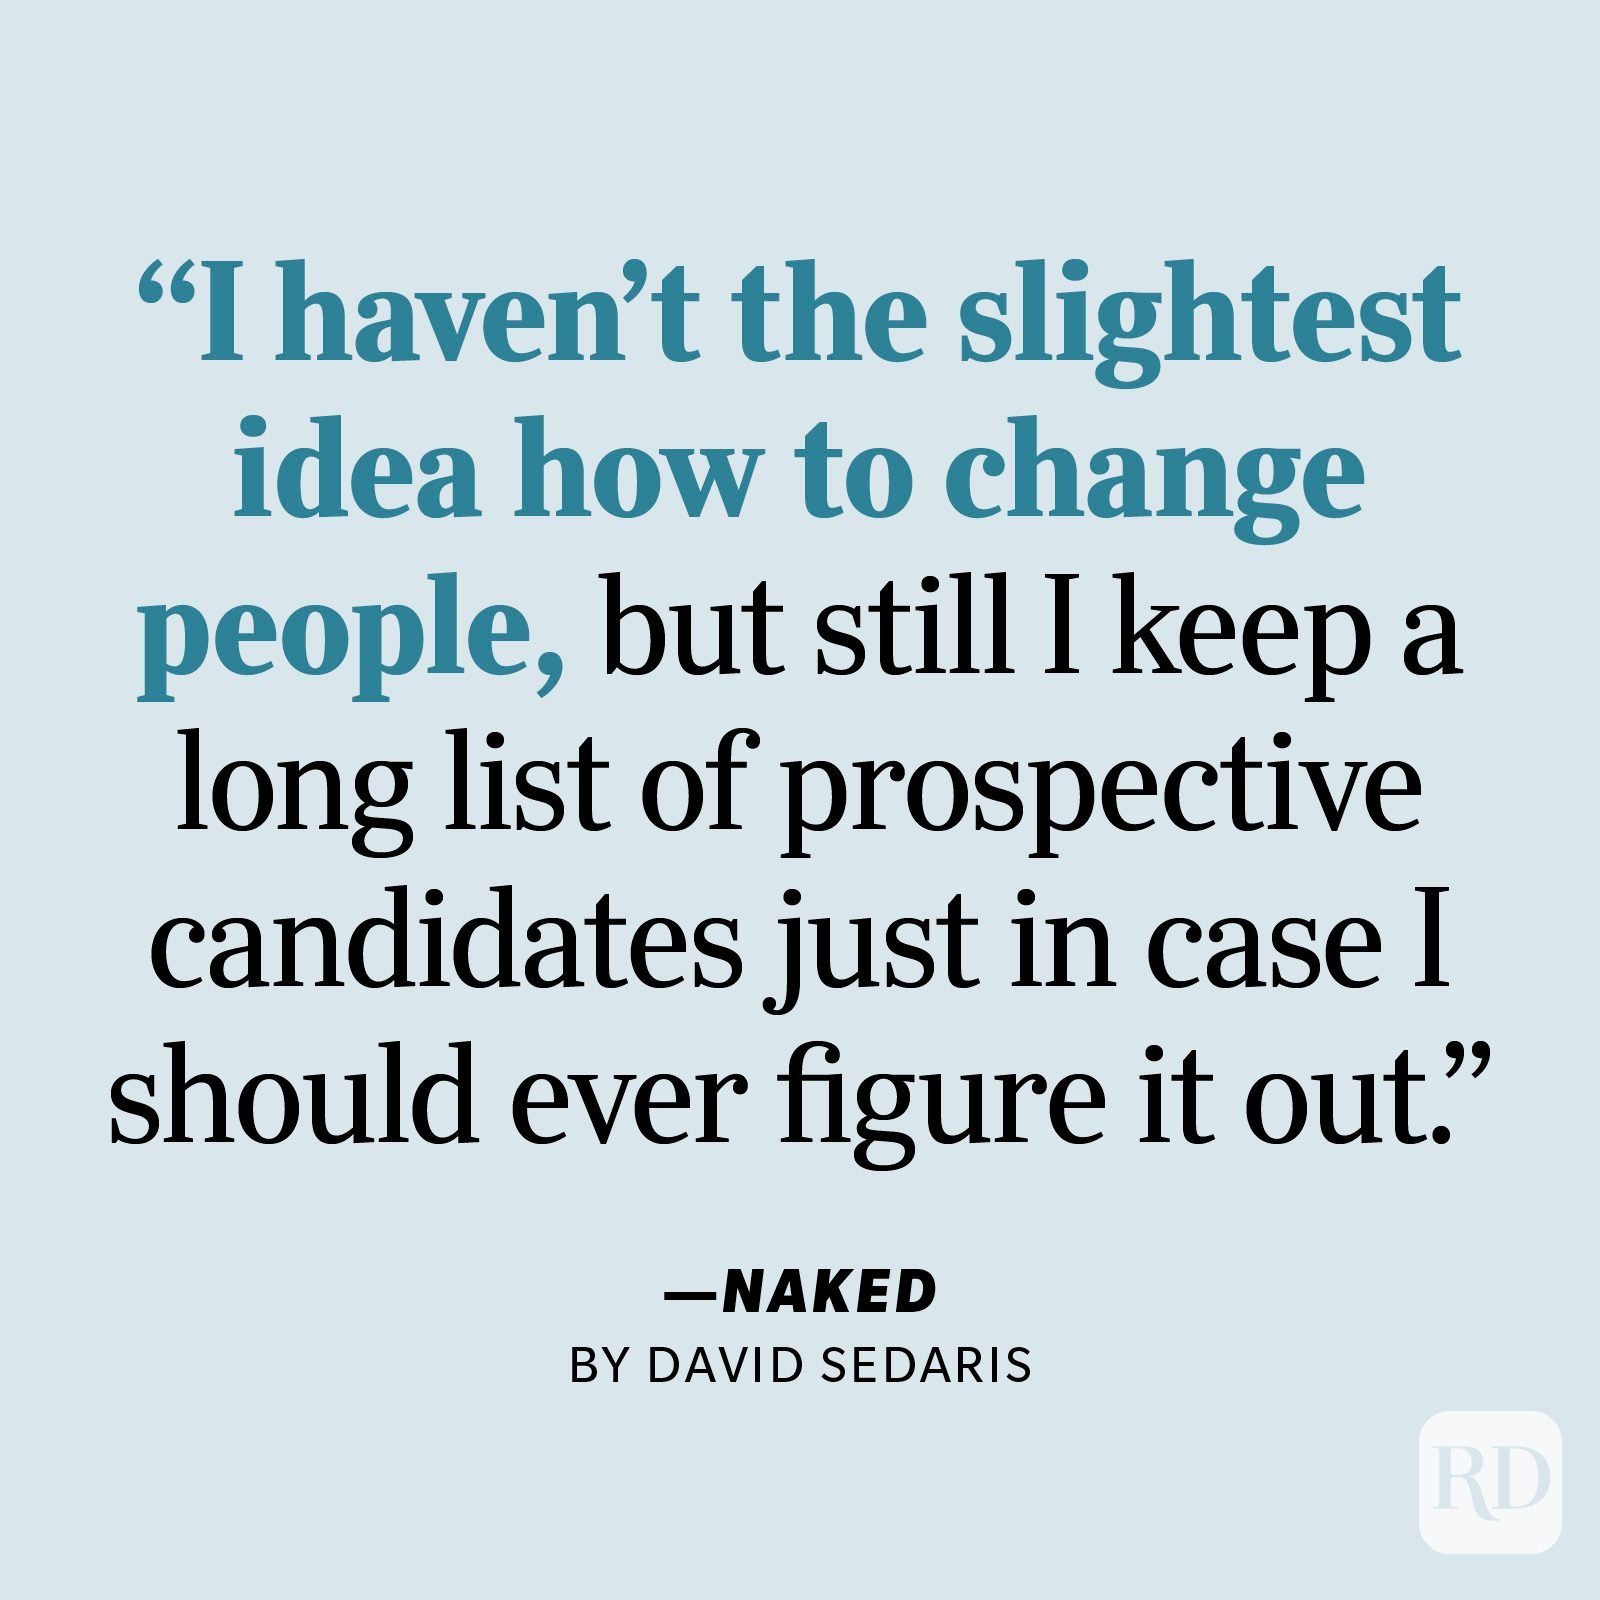 Naked by David Sedaris "I haven't the slightest idea how to change people, but still I keep a long list of prospective candidates just in case I should ever figure it out."